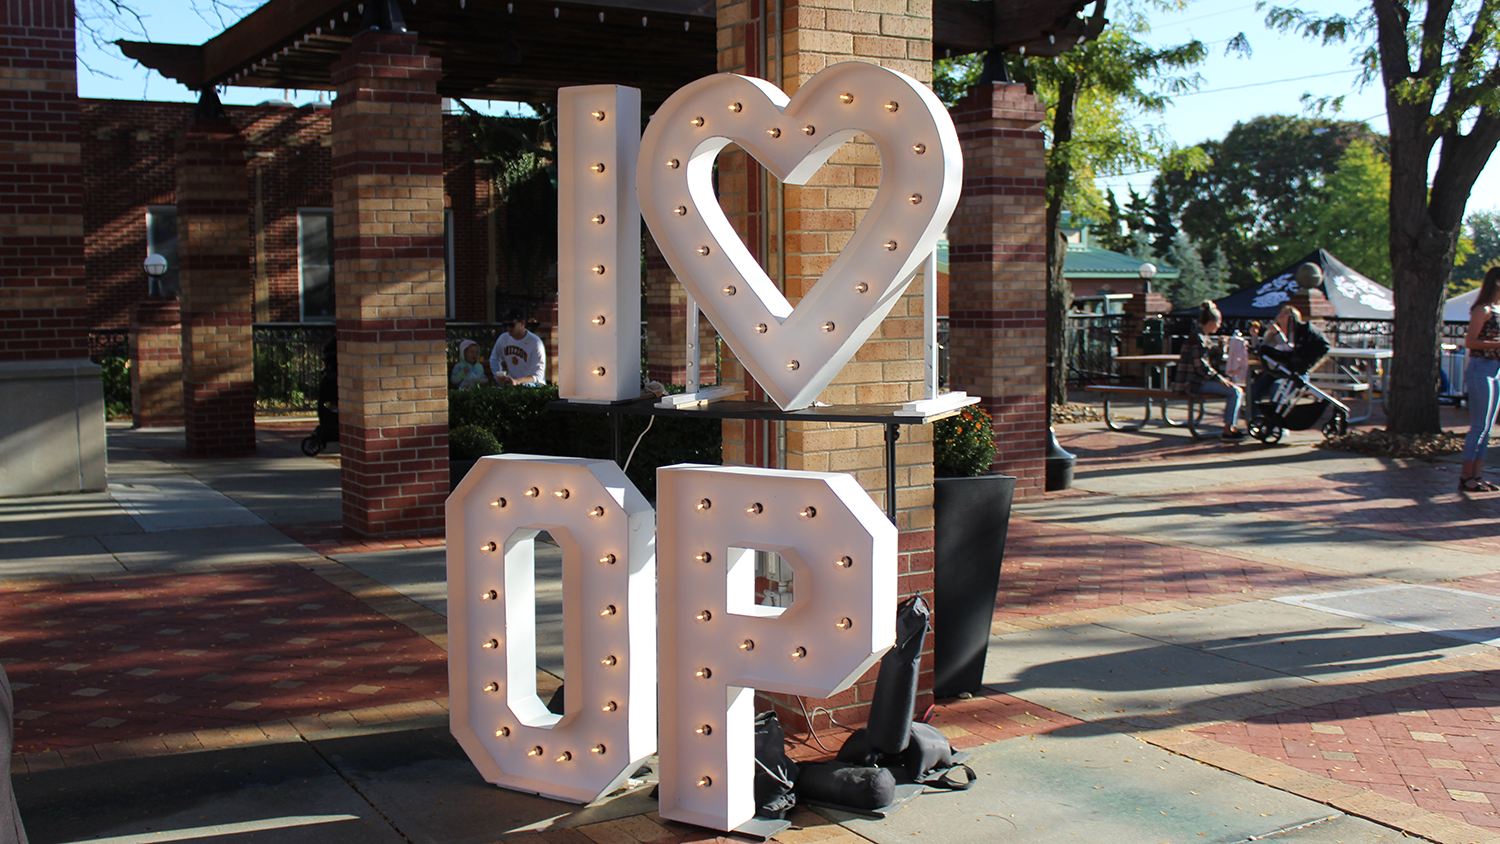 An image depicting an illuminated 'I Heart OP' sign at the Fall Festival.